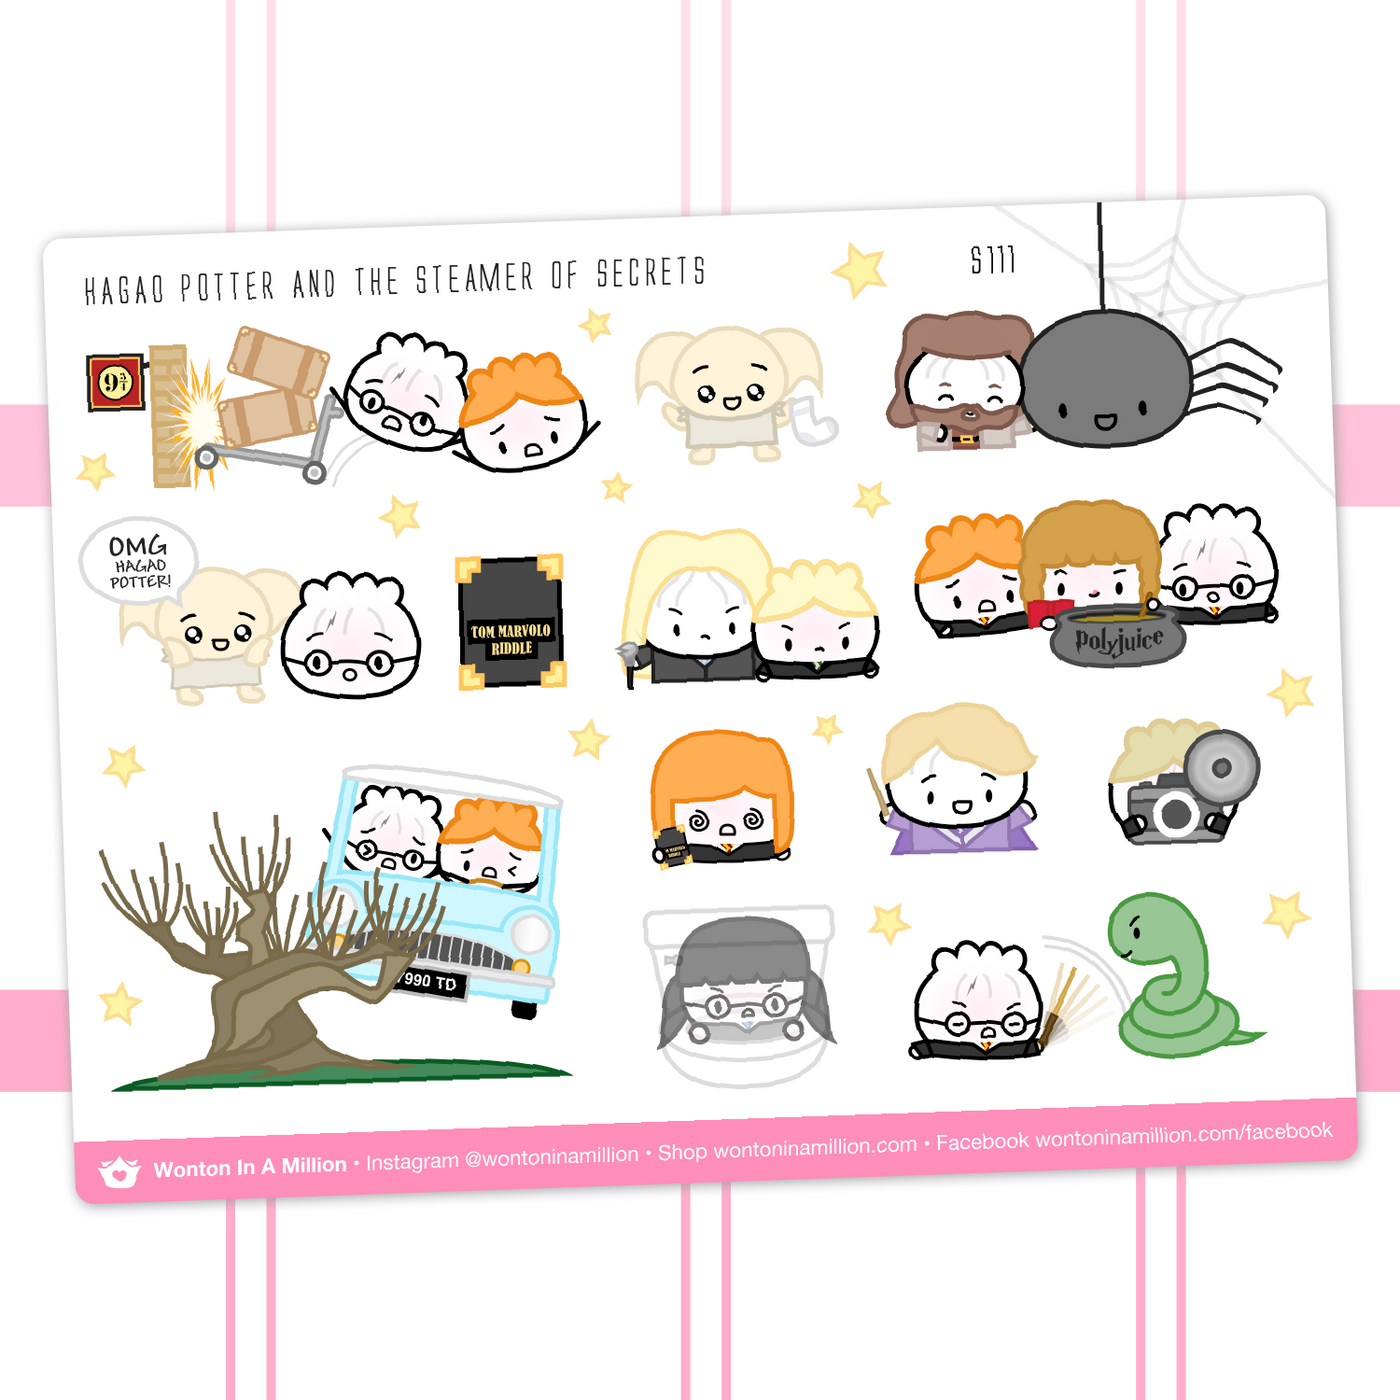 Hagao Potter [Book 2] - "The Steamer Of Secrets" Stickers